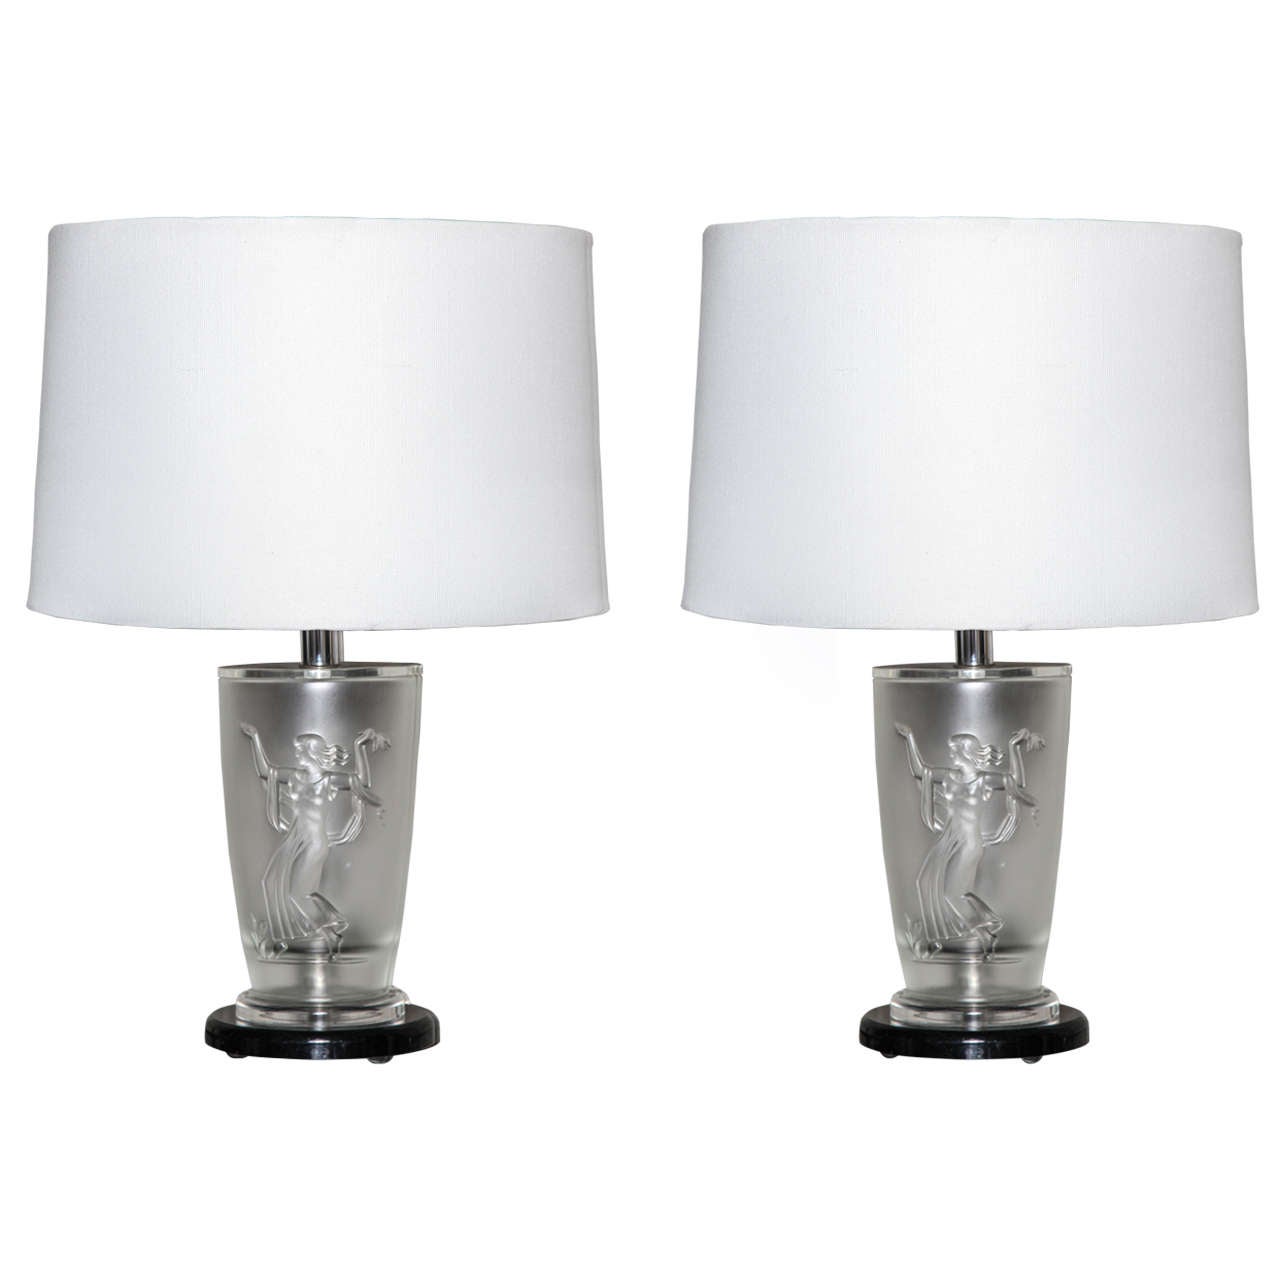 Pair of Lalique Style Table Lamps  Reduced from 2500.00 to 1800.00